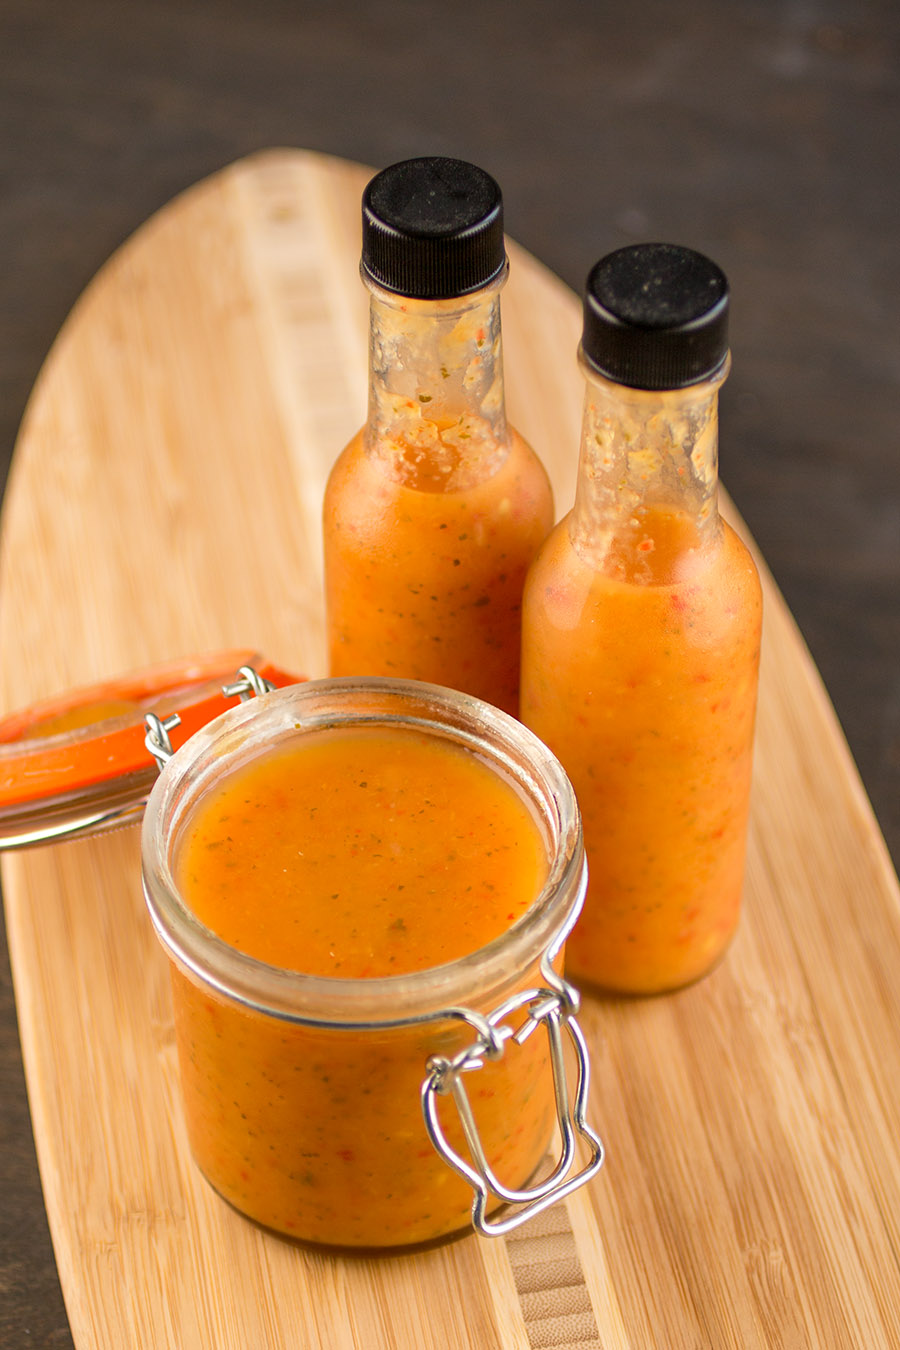 Pineapple-Mango Ghost Pepper Hot Sauce looking extremely delicious